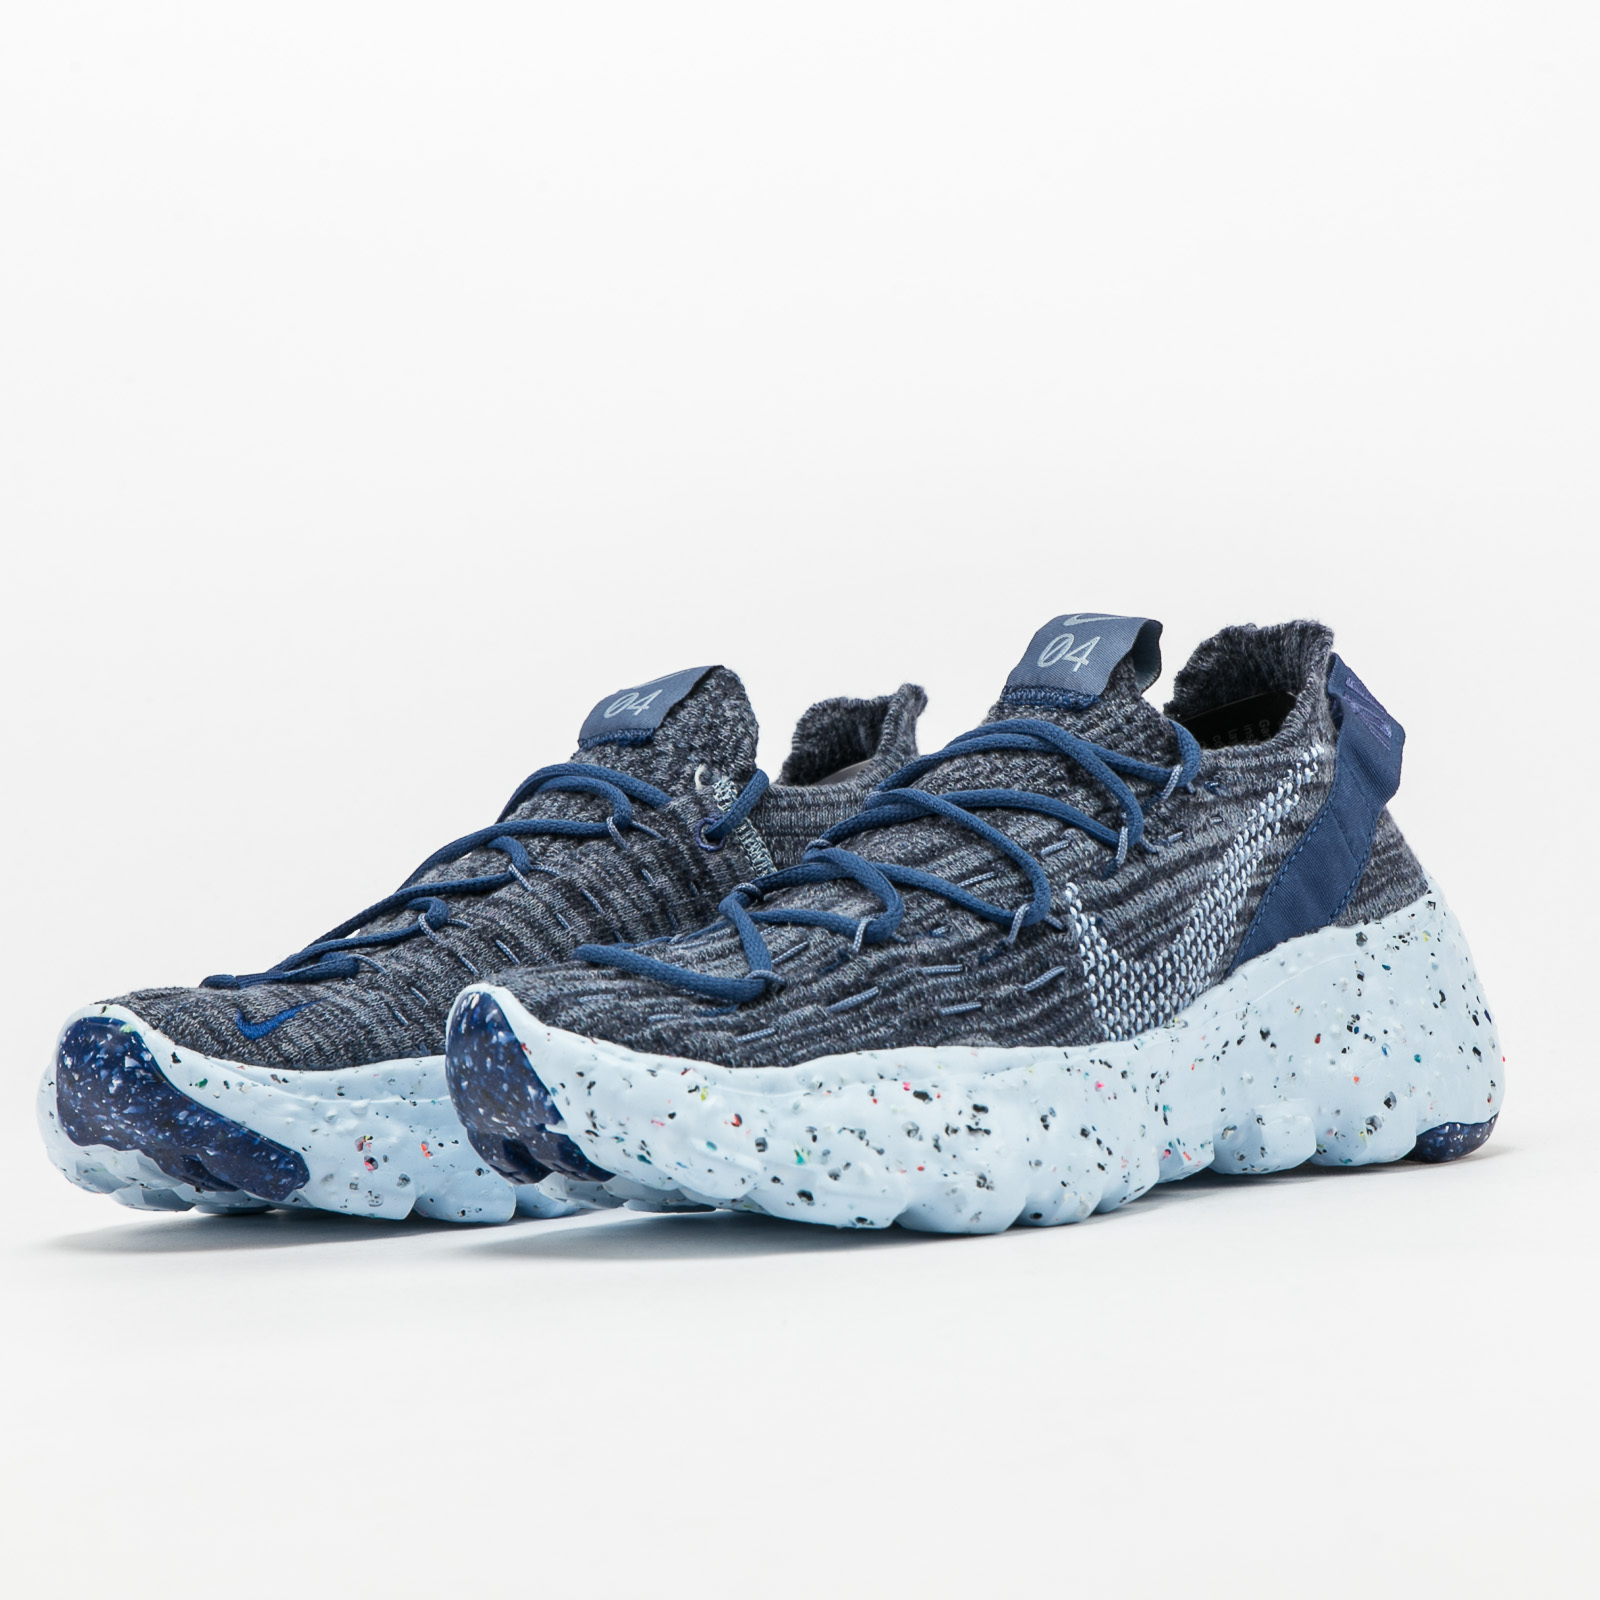 Nike Space Hippie 04 mystic navy / chambray blue Nike